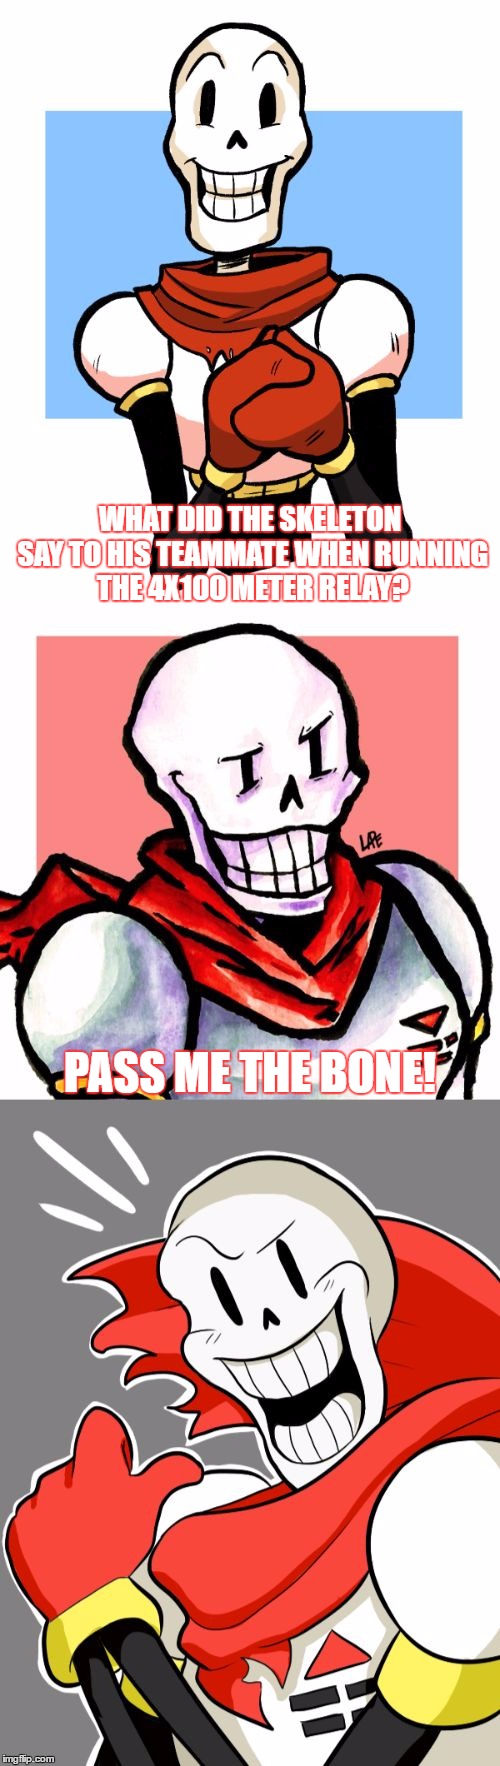 Bad Pun Papyrus, And I Like To Thank SpursFanFromAround For The Idea Of This Meme | WHAT DID THE SKELETON SAY TO HIS TEAMMATE WHEN RUNNING THE 4X100 METER RELAY? PASS ME THE BONE! | image tagged in bad pun papyrus,memes,papyrus,bad pun,funny,undertale | made w/ Imgflip meme maker